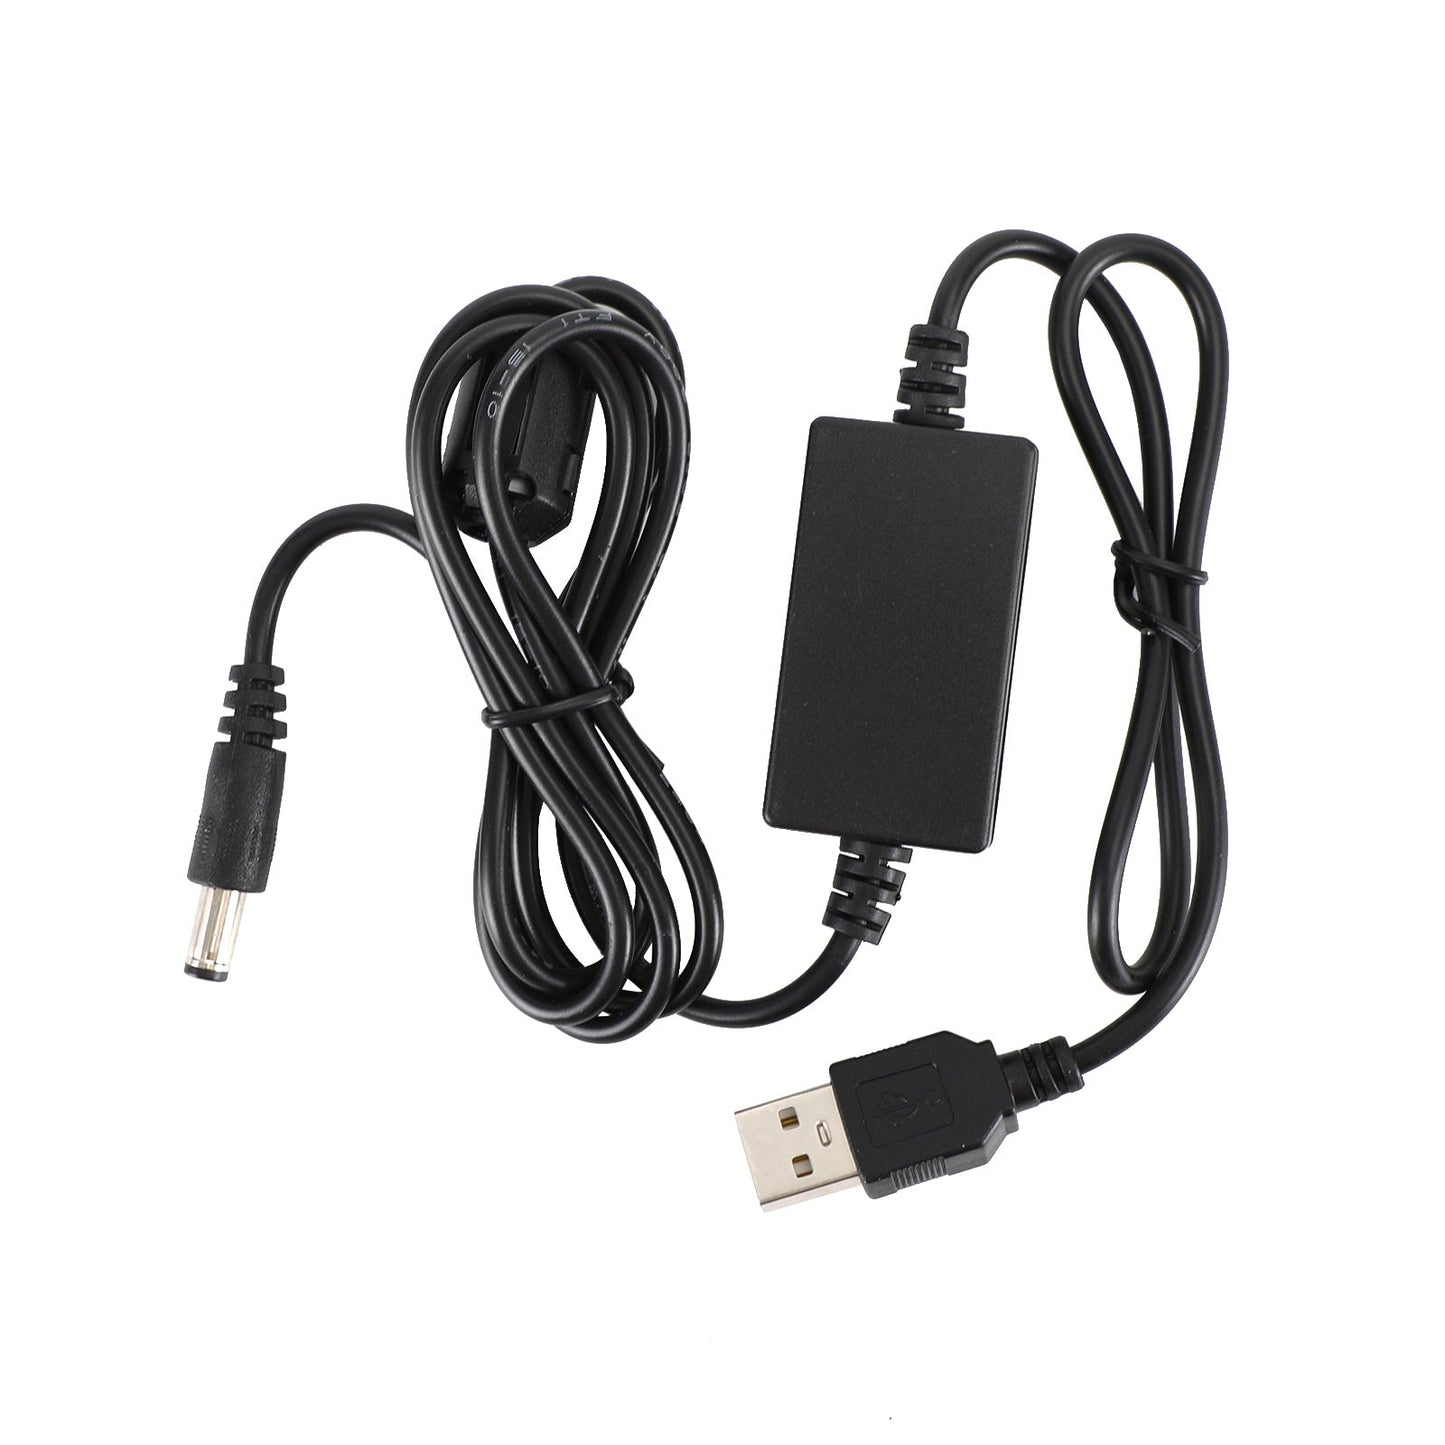 DC-5B USB Charger Cable Battery Charging Cord For TYT MD380 Radio Accessories